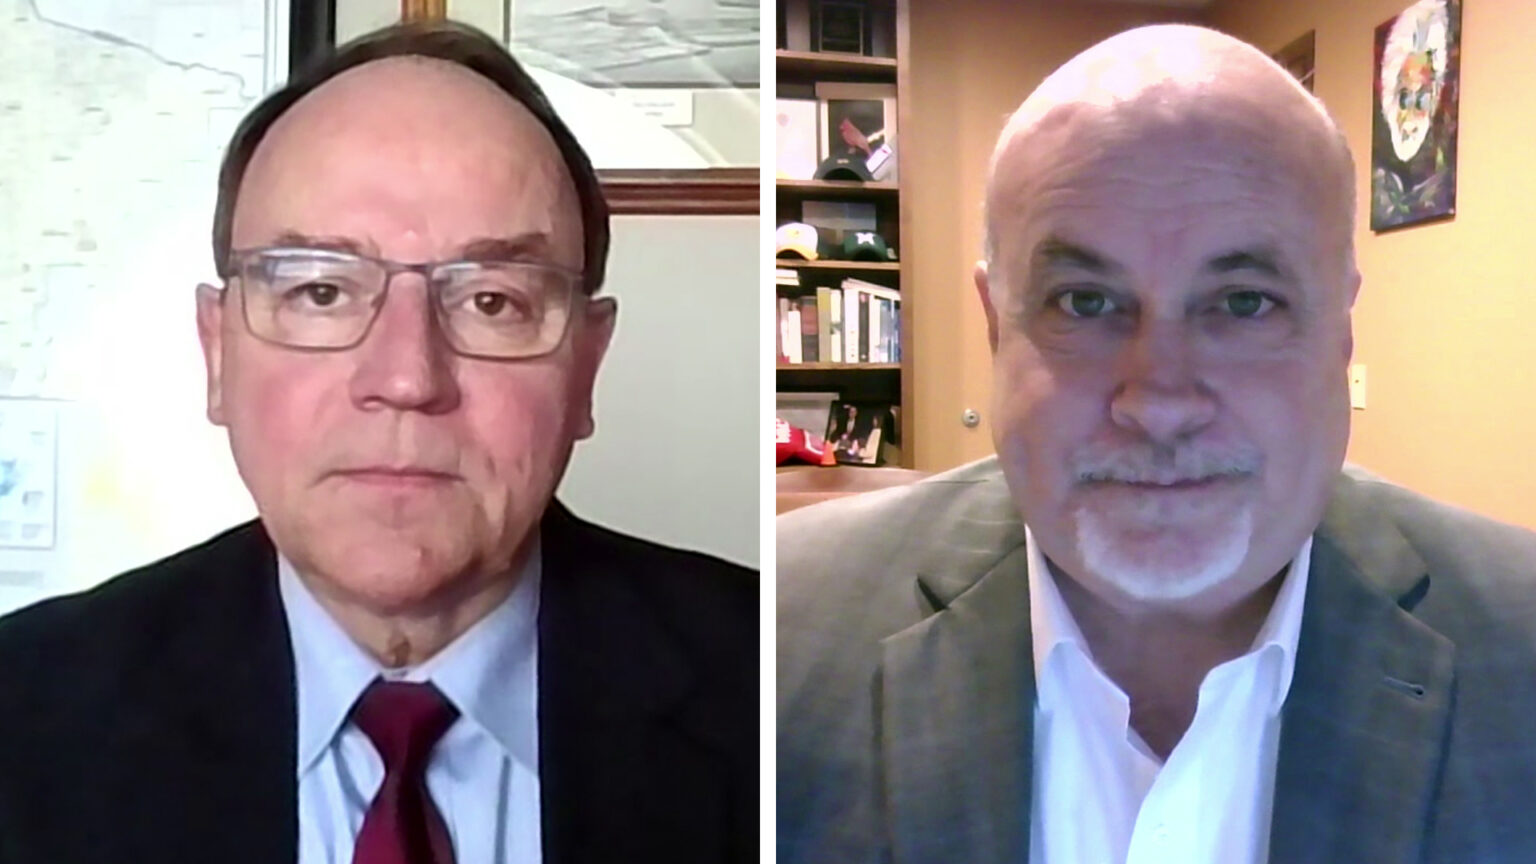 Two adjacent screenshots show Tom Tiffany and Mark Pocan seated in different locations.